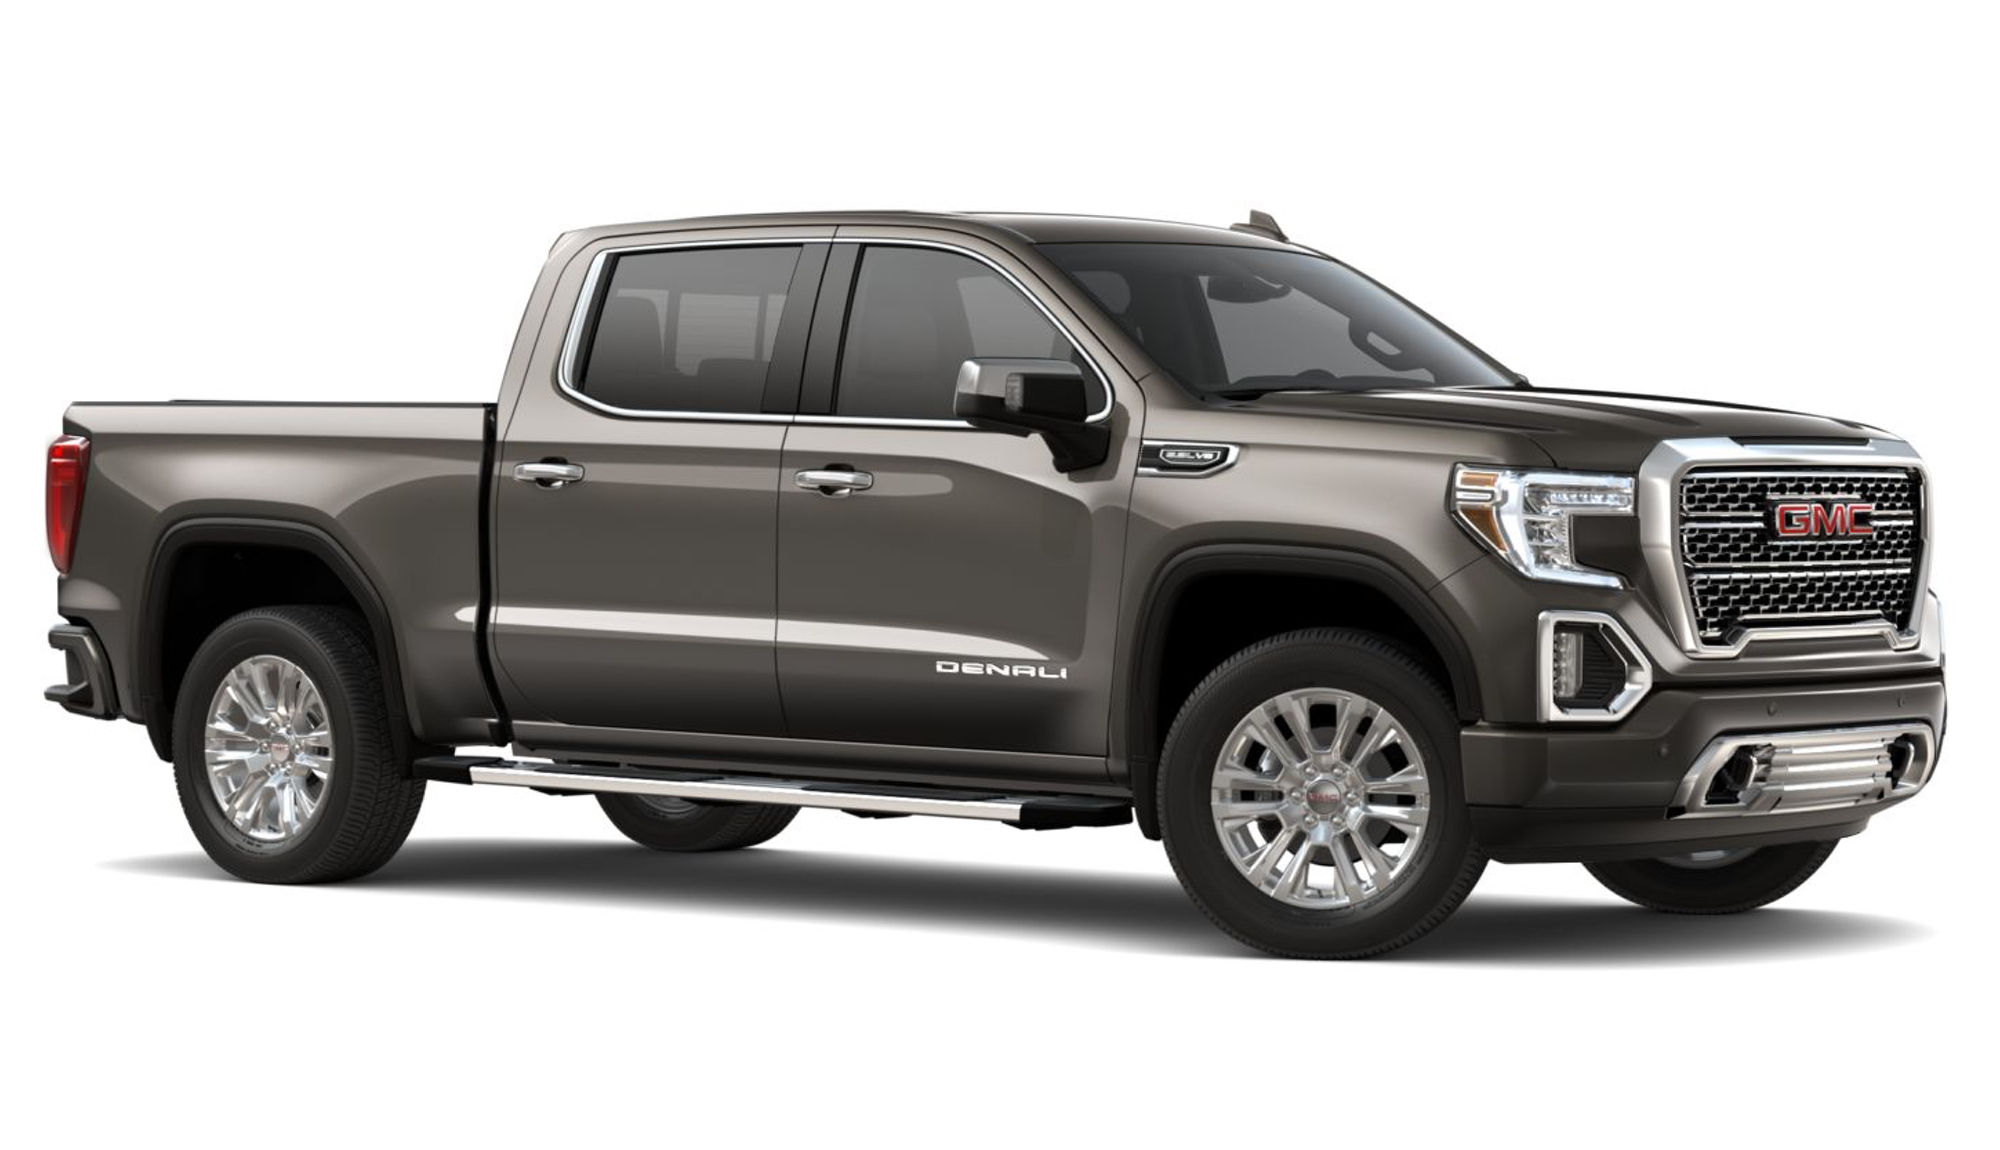 2020 Sierra 1500 Ditches This Paint Option Gains New One Gm Authority